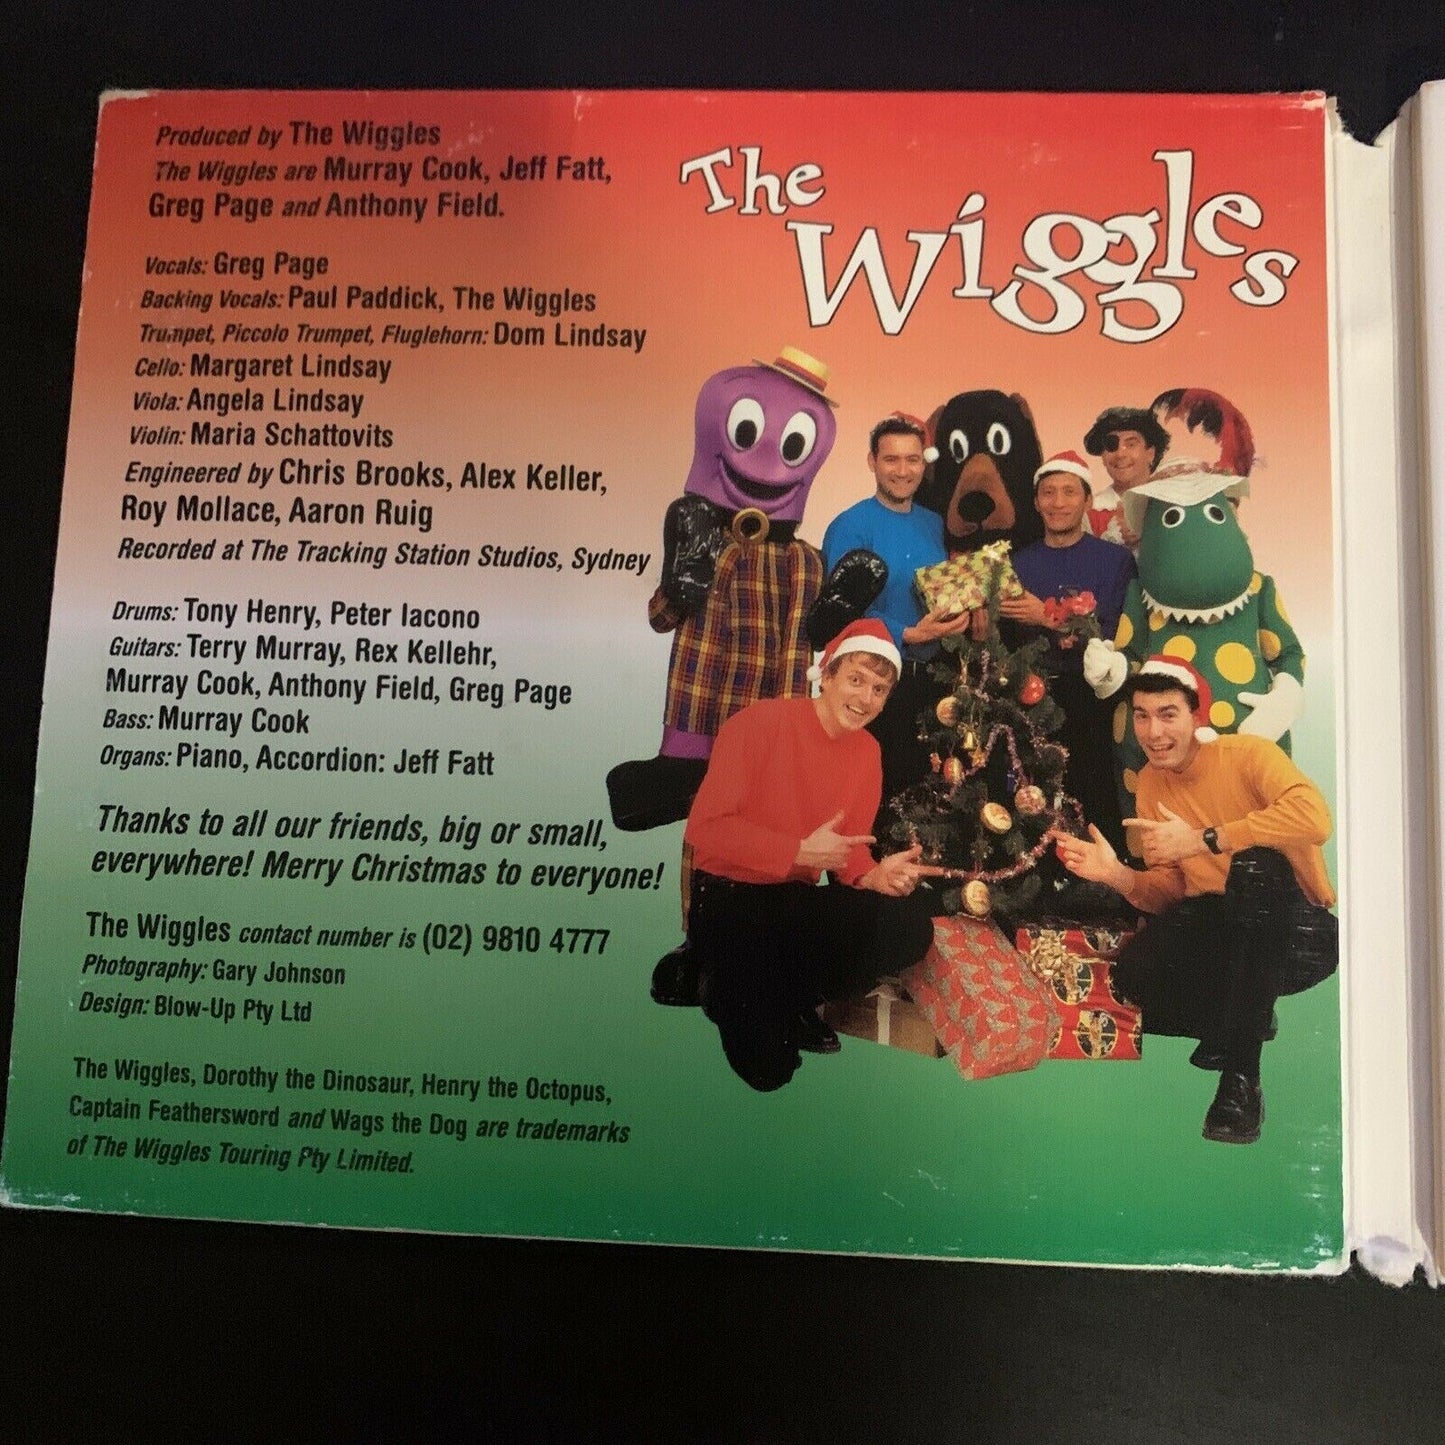 The Wiggles - Wiggly Wiggly Christmas (CD, 1996) Australian 26 Track CD Album